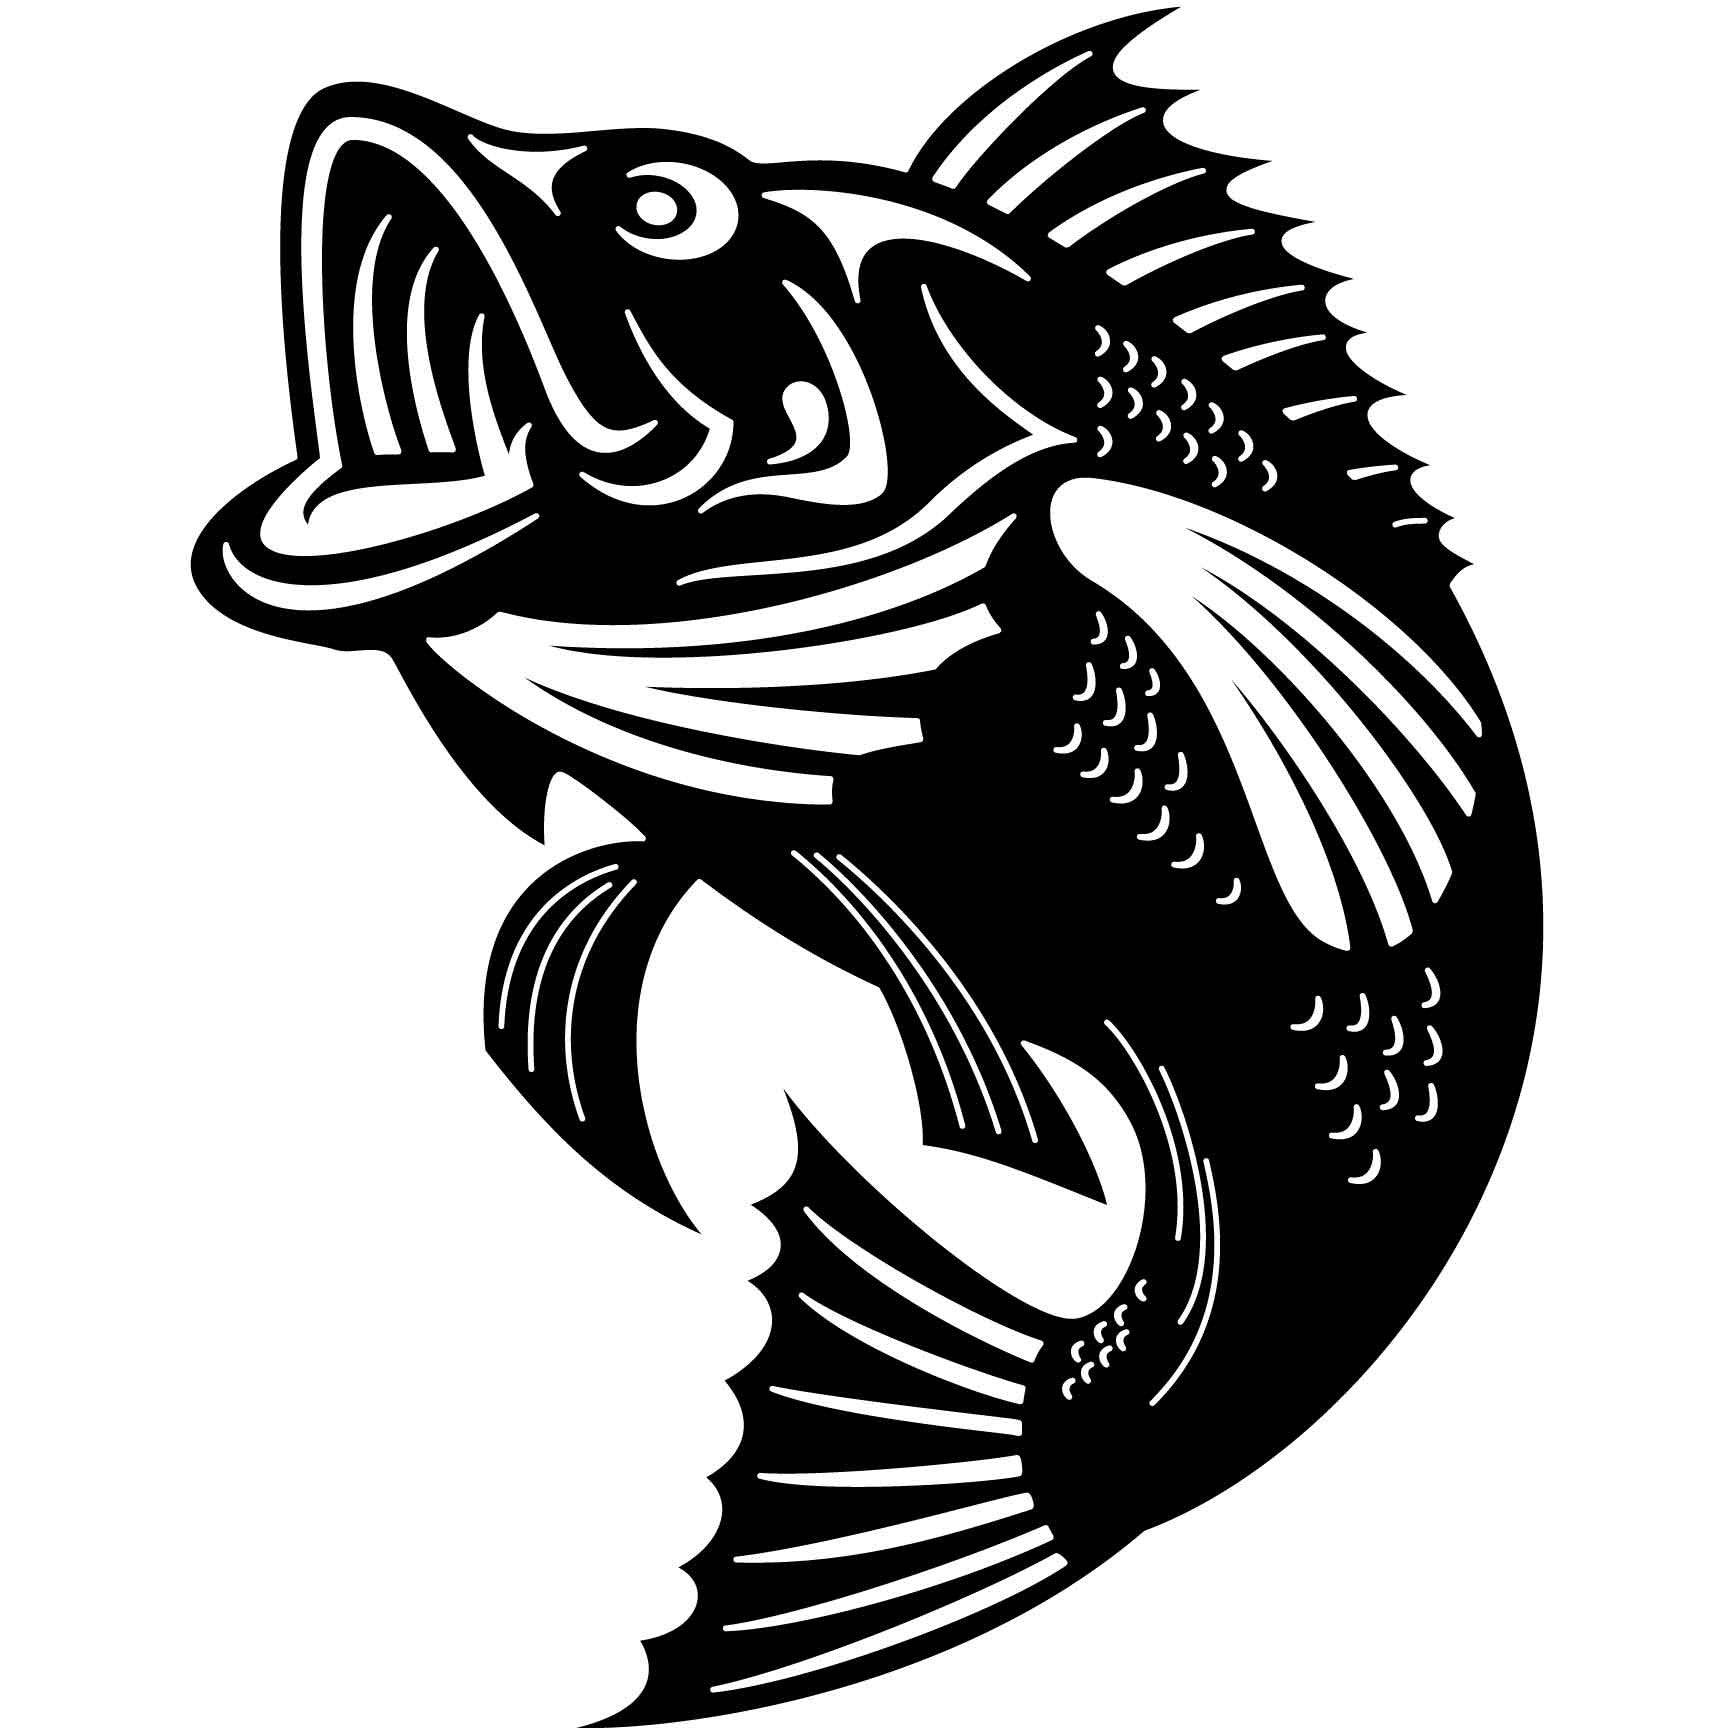 Underwater Fish-Bass 03 DXF File Cut Ready for CNC